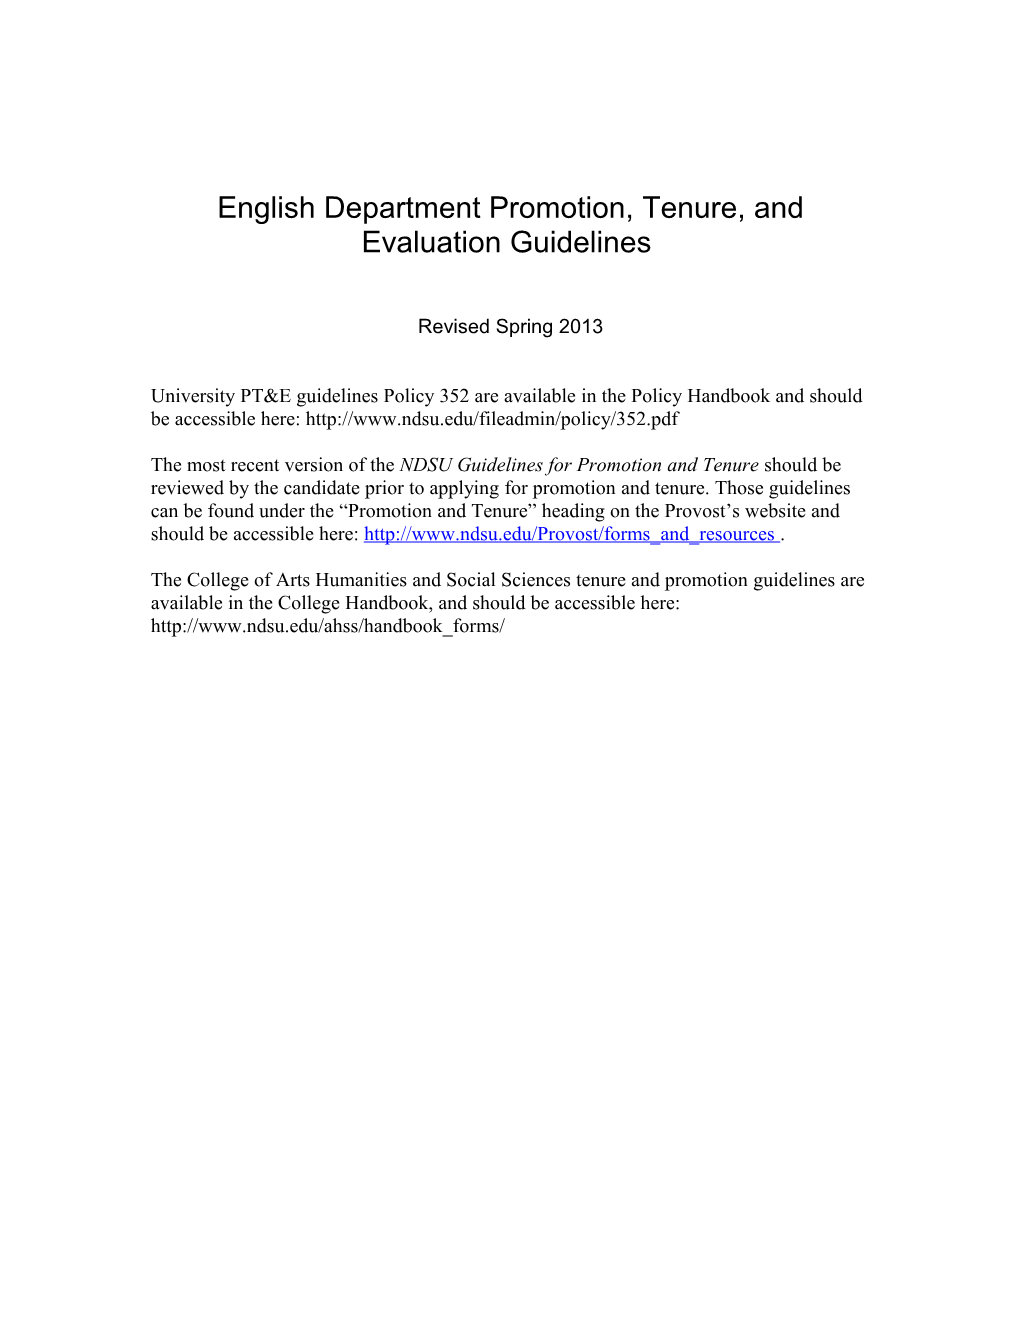 English Department Promotion & Tenure Guidelines